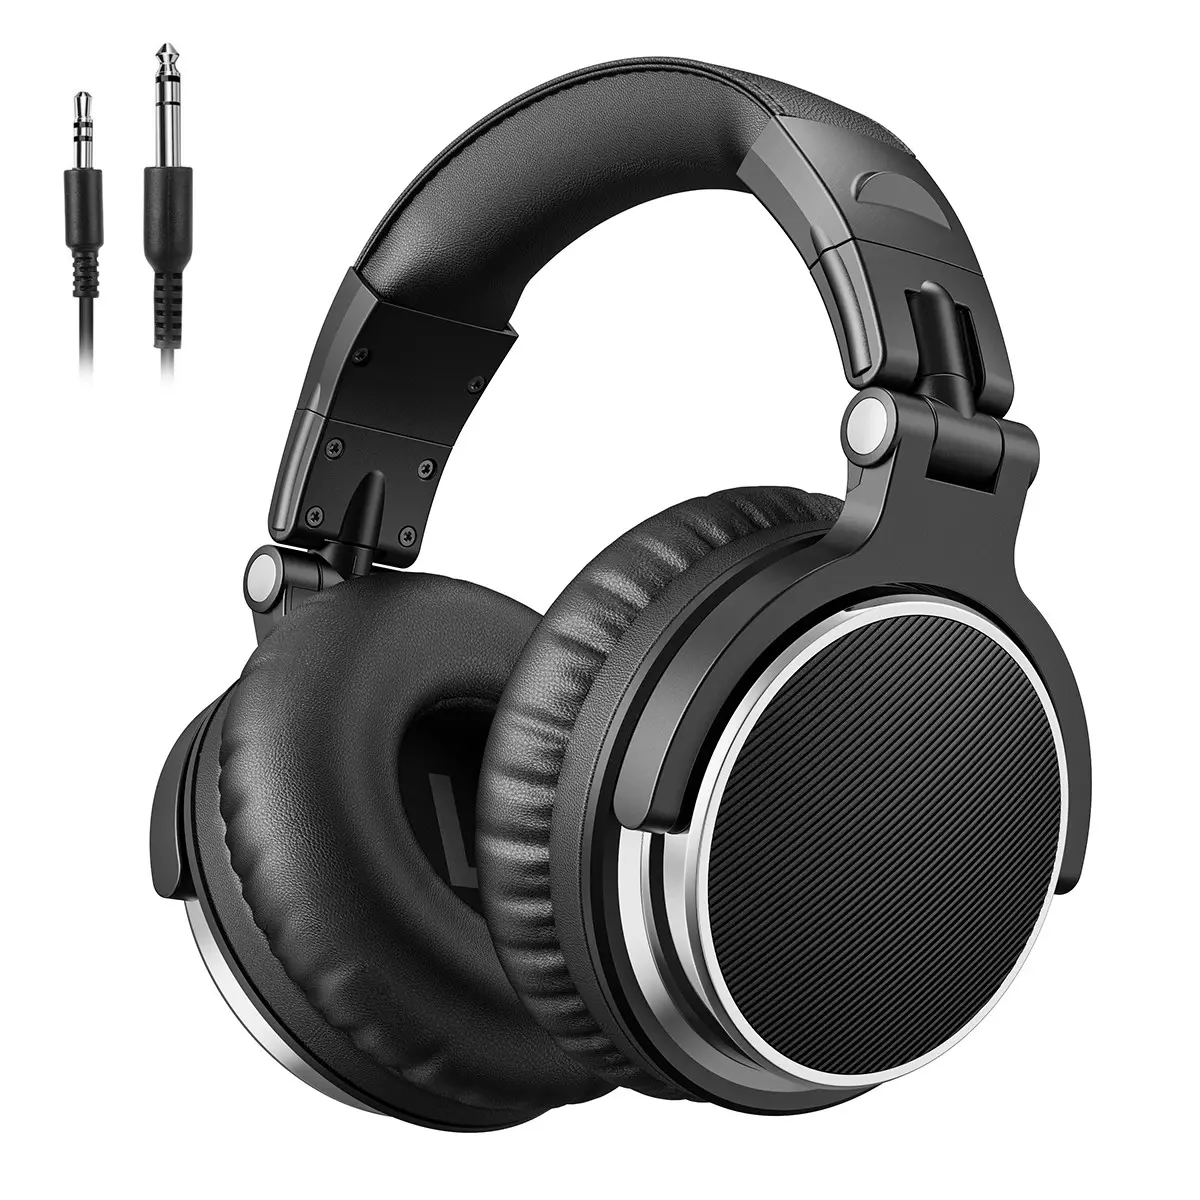 Y80 3.5mm 6.35mm Over ear DJ headphones with music share function and detachable coiled cable with Microphone